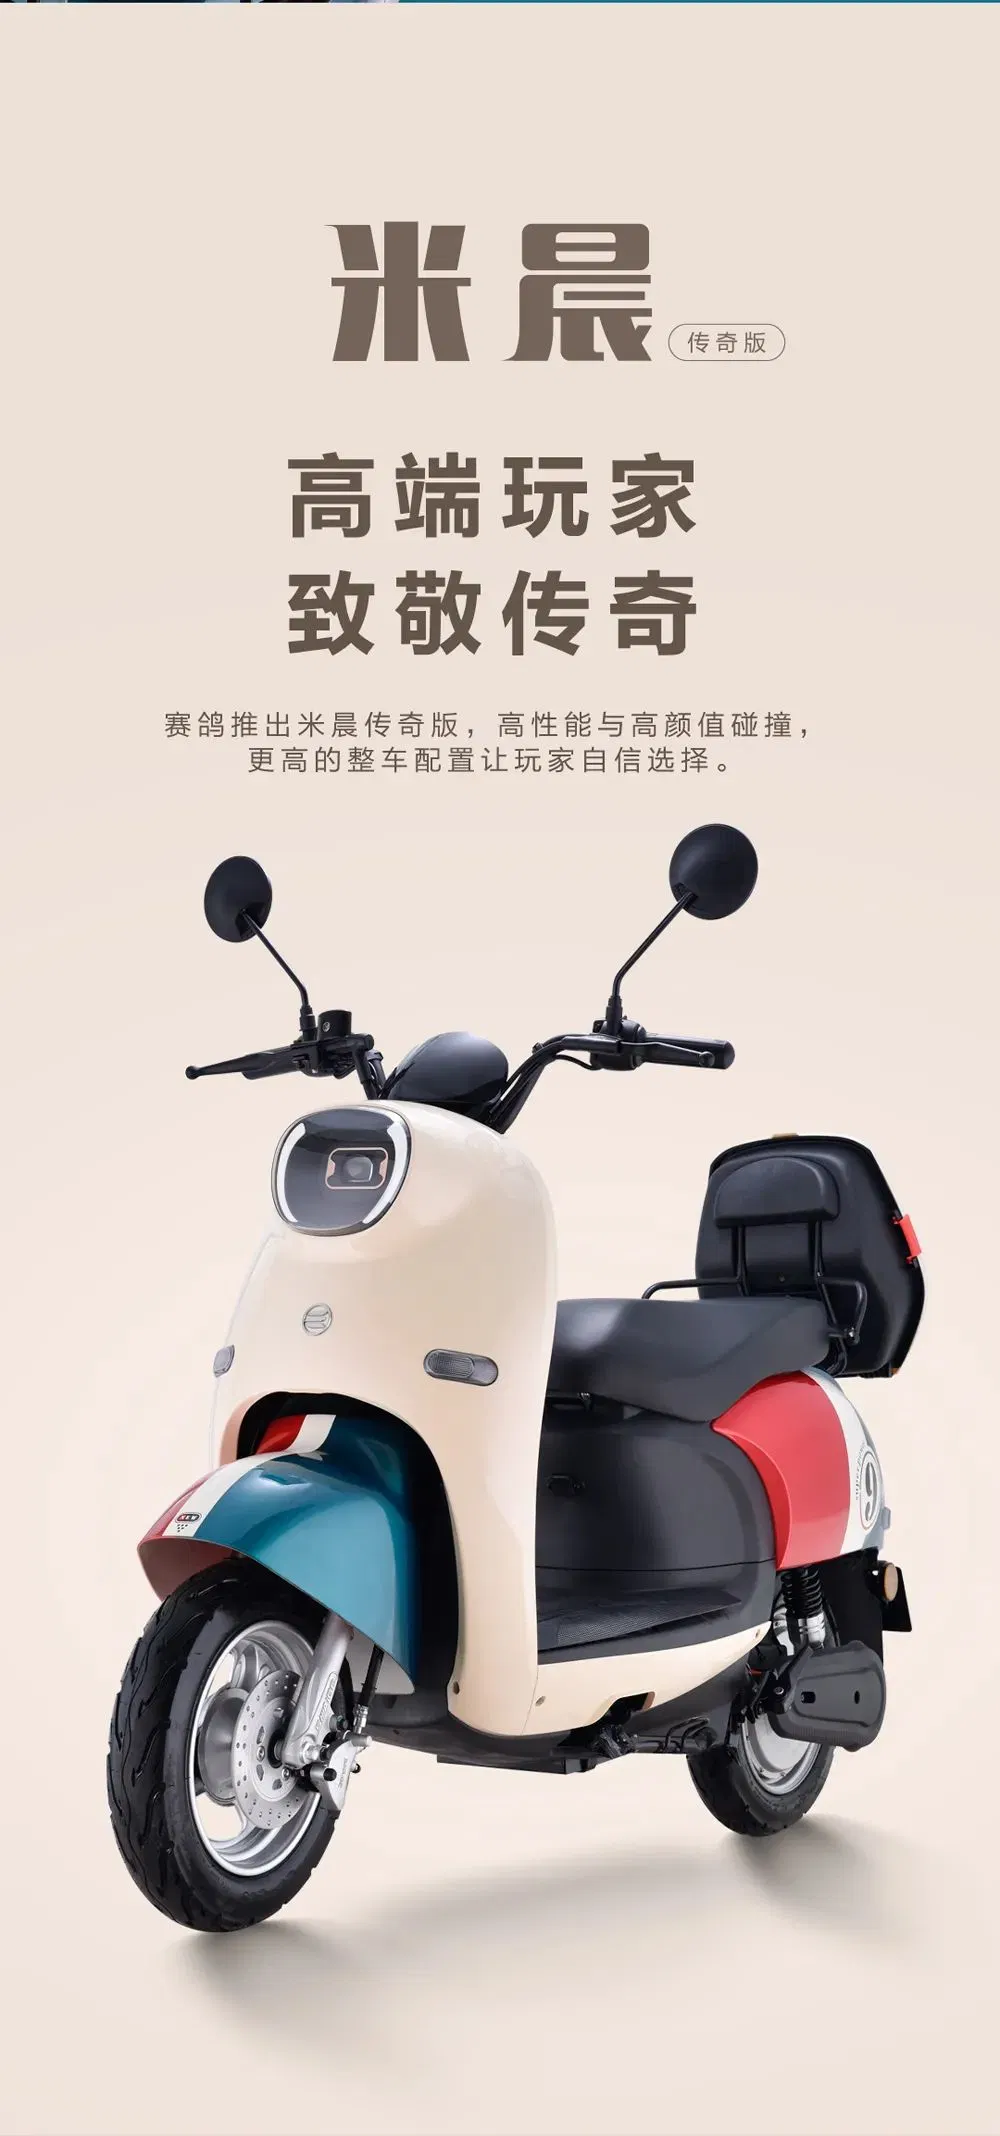 Saige Fashionable Electric Bike 1000W Scooter for Women Long Range Vintage Motorcycle